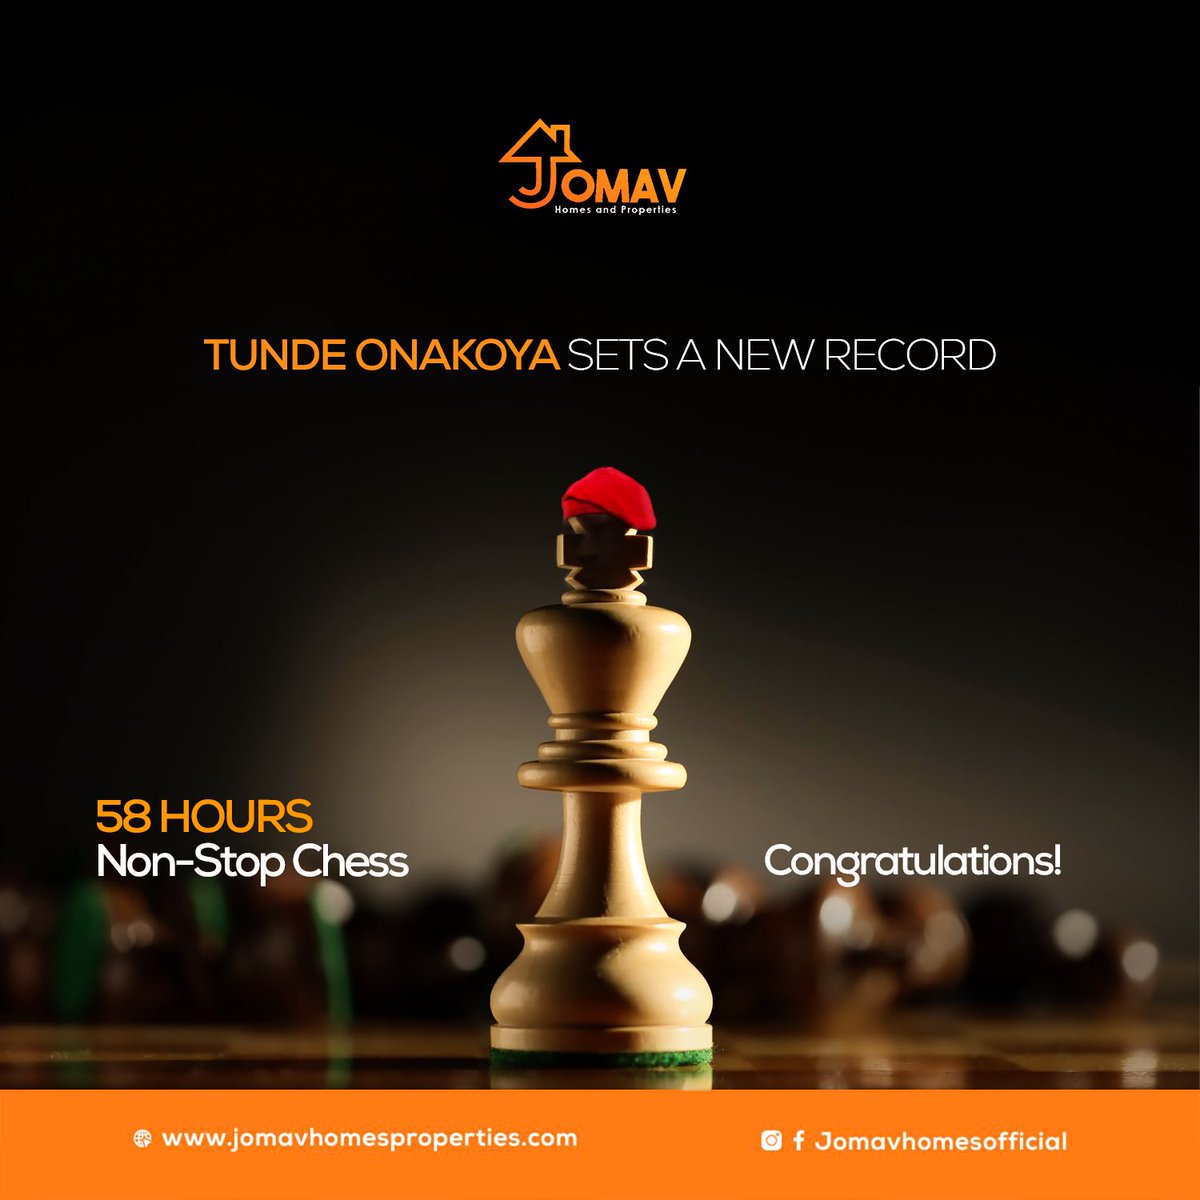 Congratulations on Breaking the Chess World Record  @
Your passion and determination is truly remarkable.

Cheers to more Incredible Feats!
We’re super proud of you!

#tunde58hoursofchess
#tundeonakoya
#jomavhomes